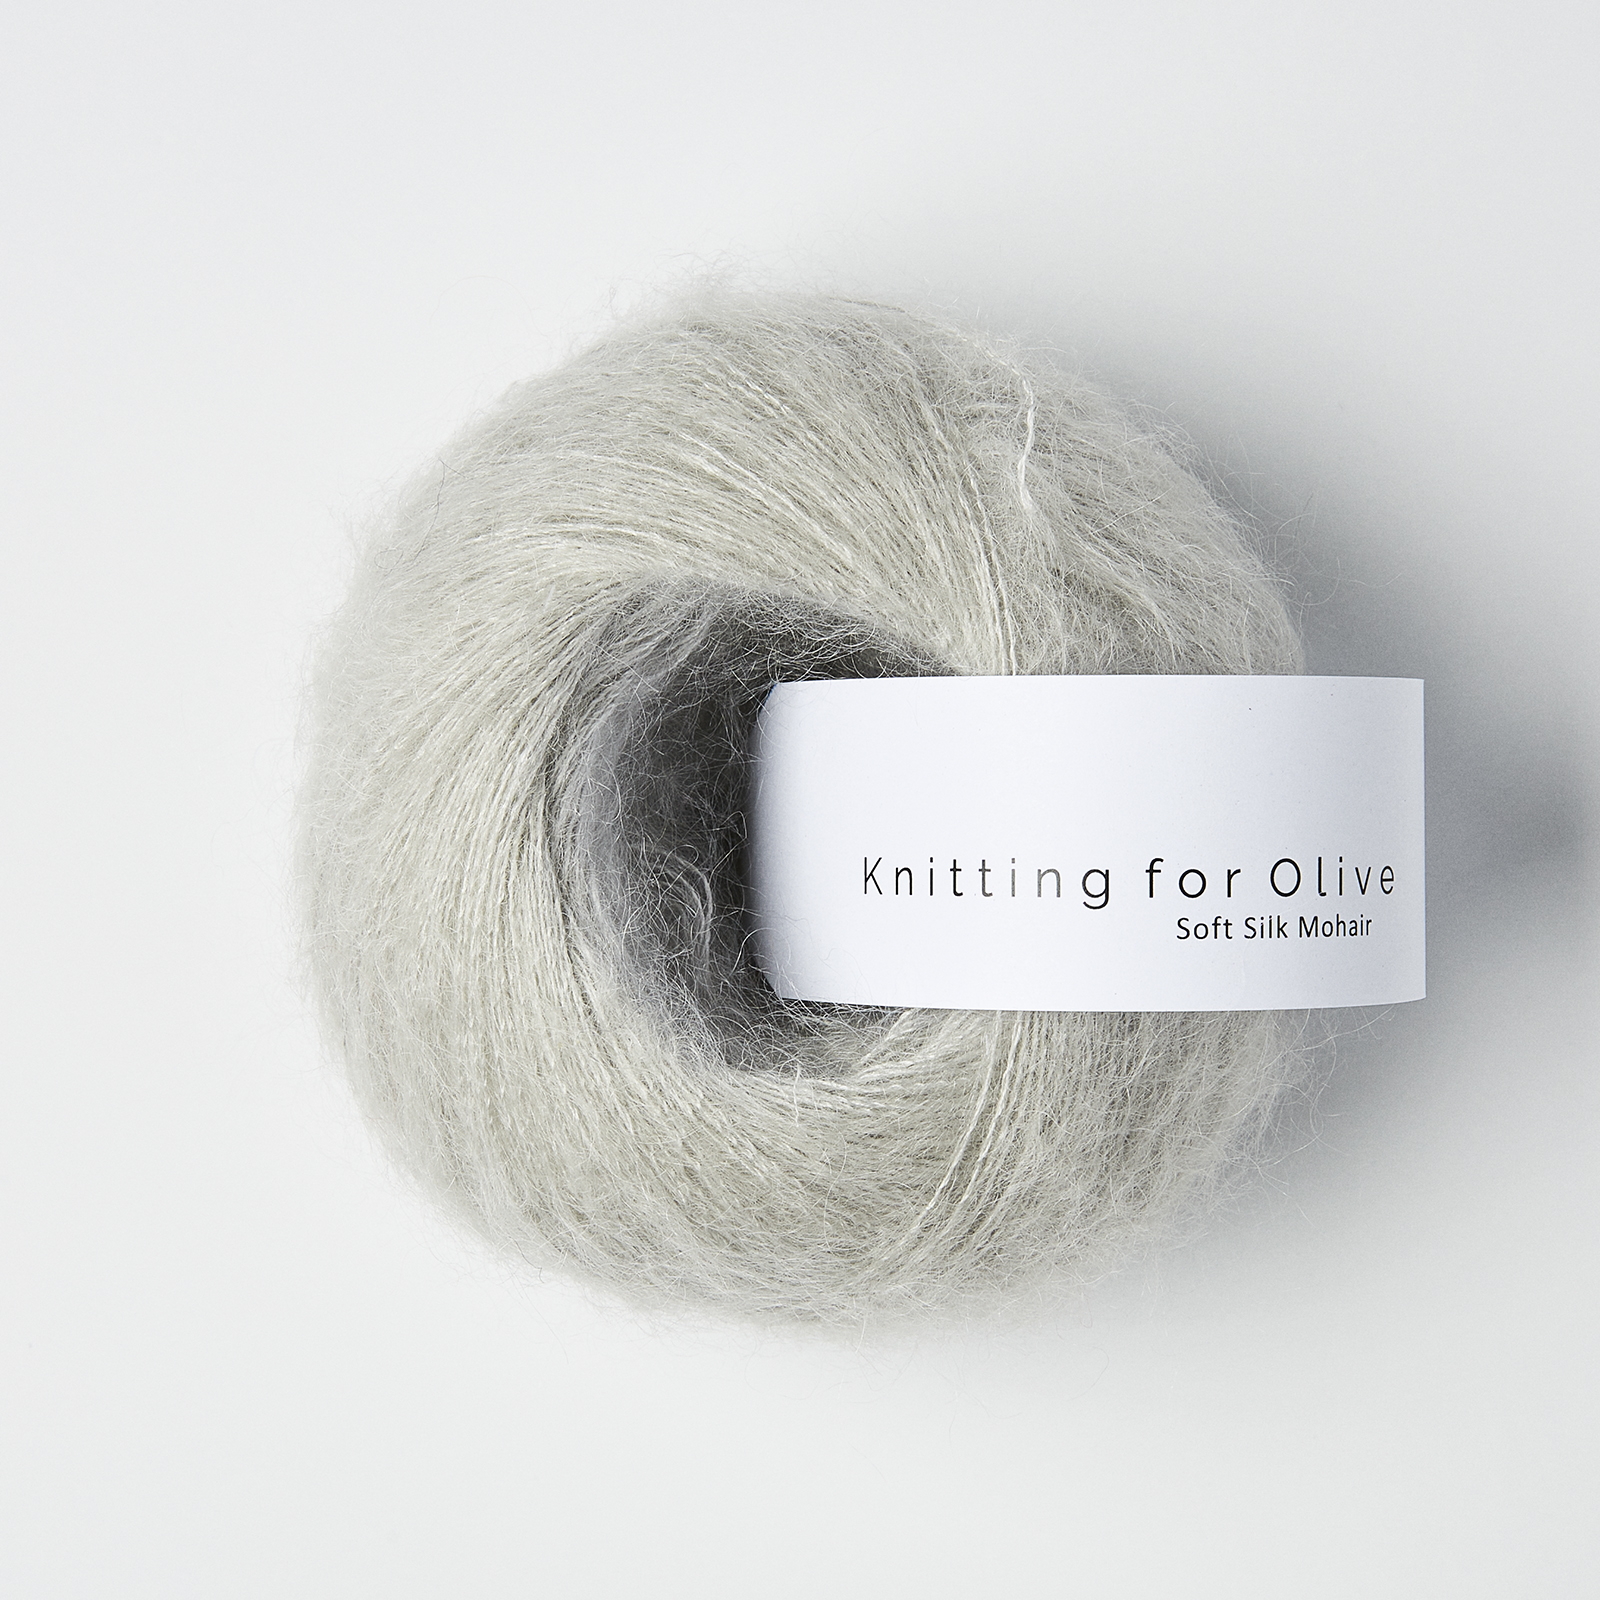 soft silk mohair knitting for olive | soft silk mohair: pearl gray